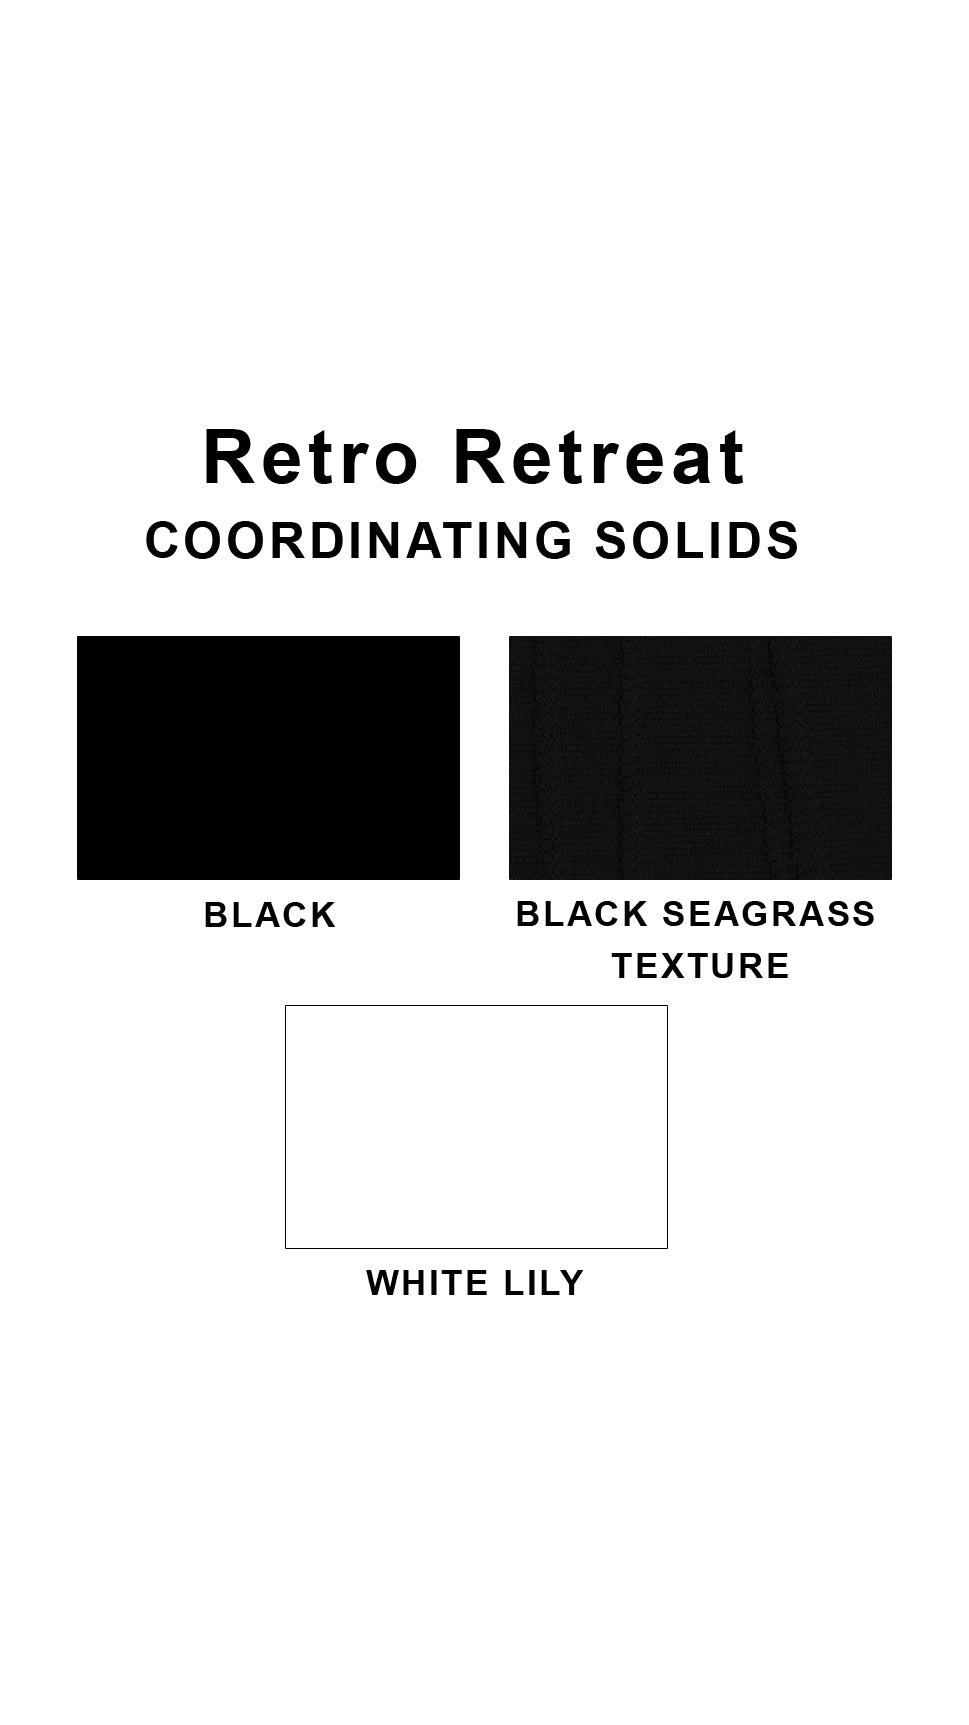 Coordinating solids chart for Retro Retreat swimsuit print: Black, Black Seagrass Texture and White Lily